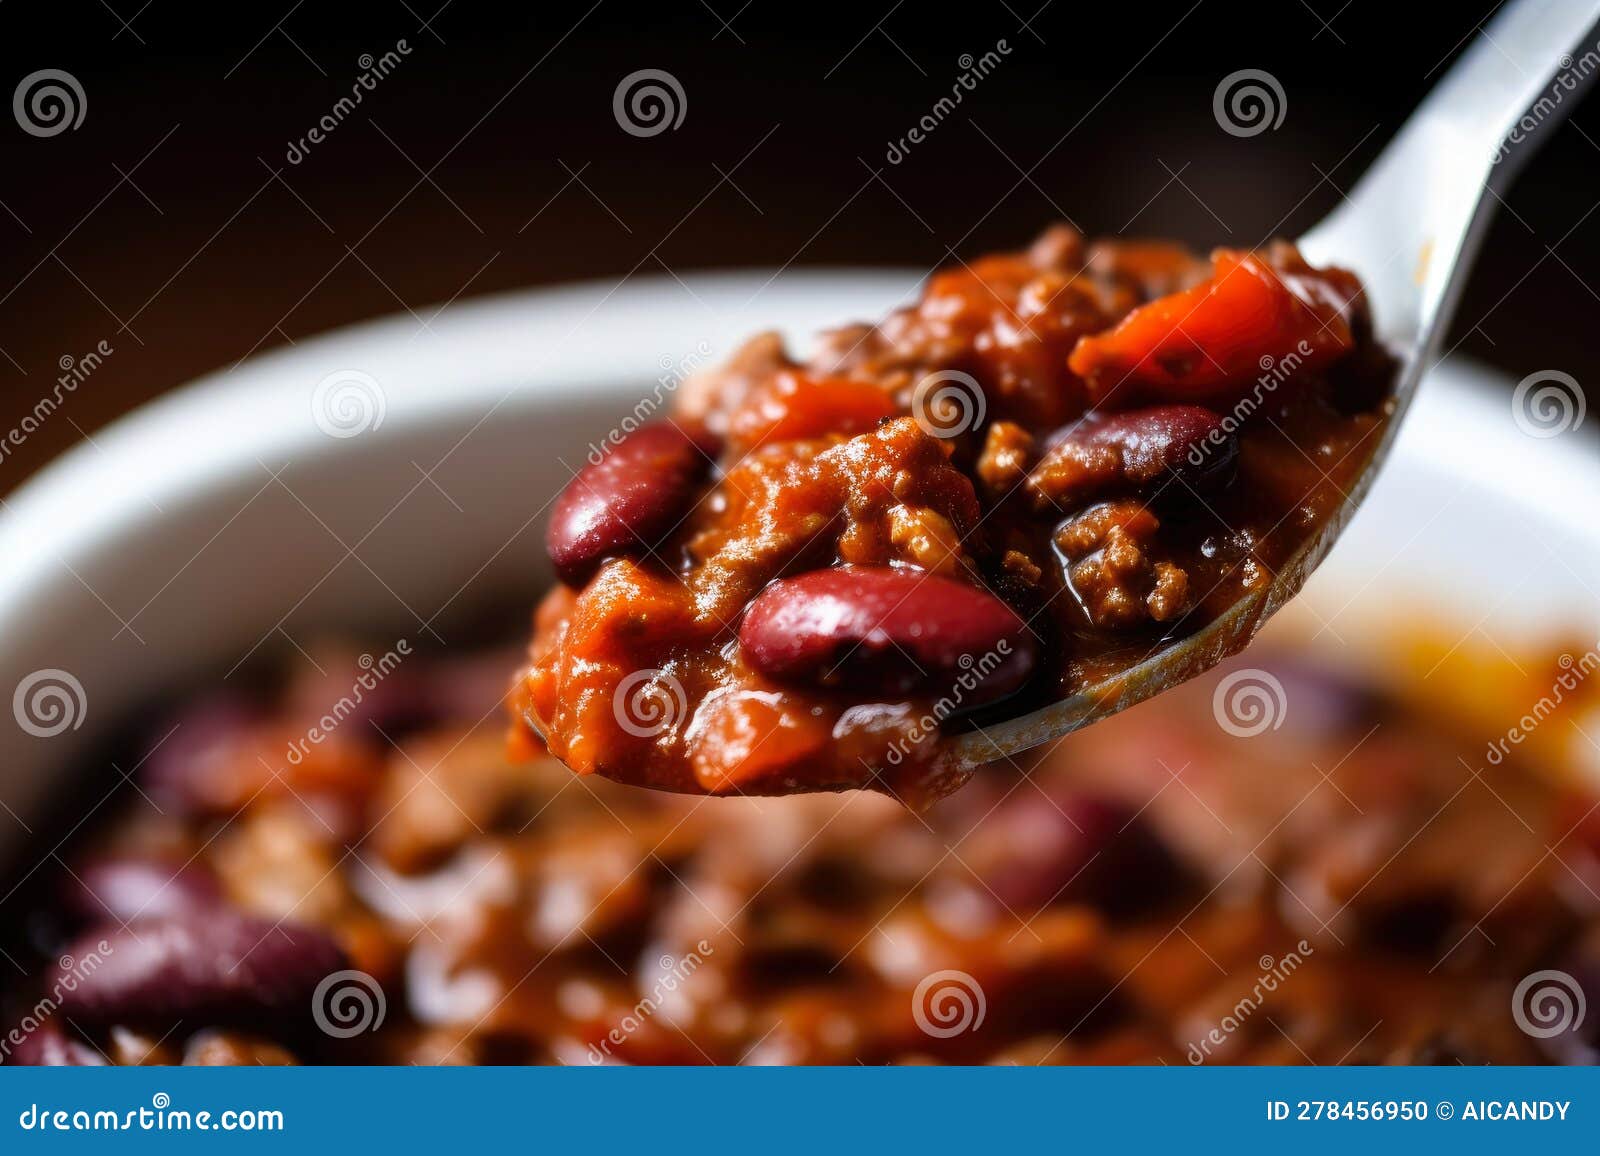 close-up of a spoonful of chili con carne with vibrant red color and texture of ground beef, beans, and tomatoes